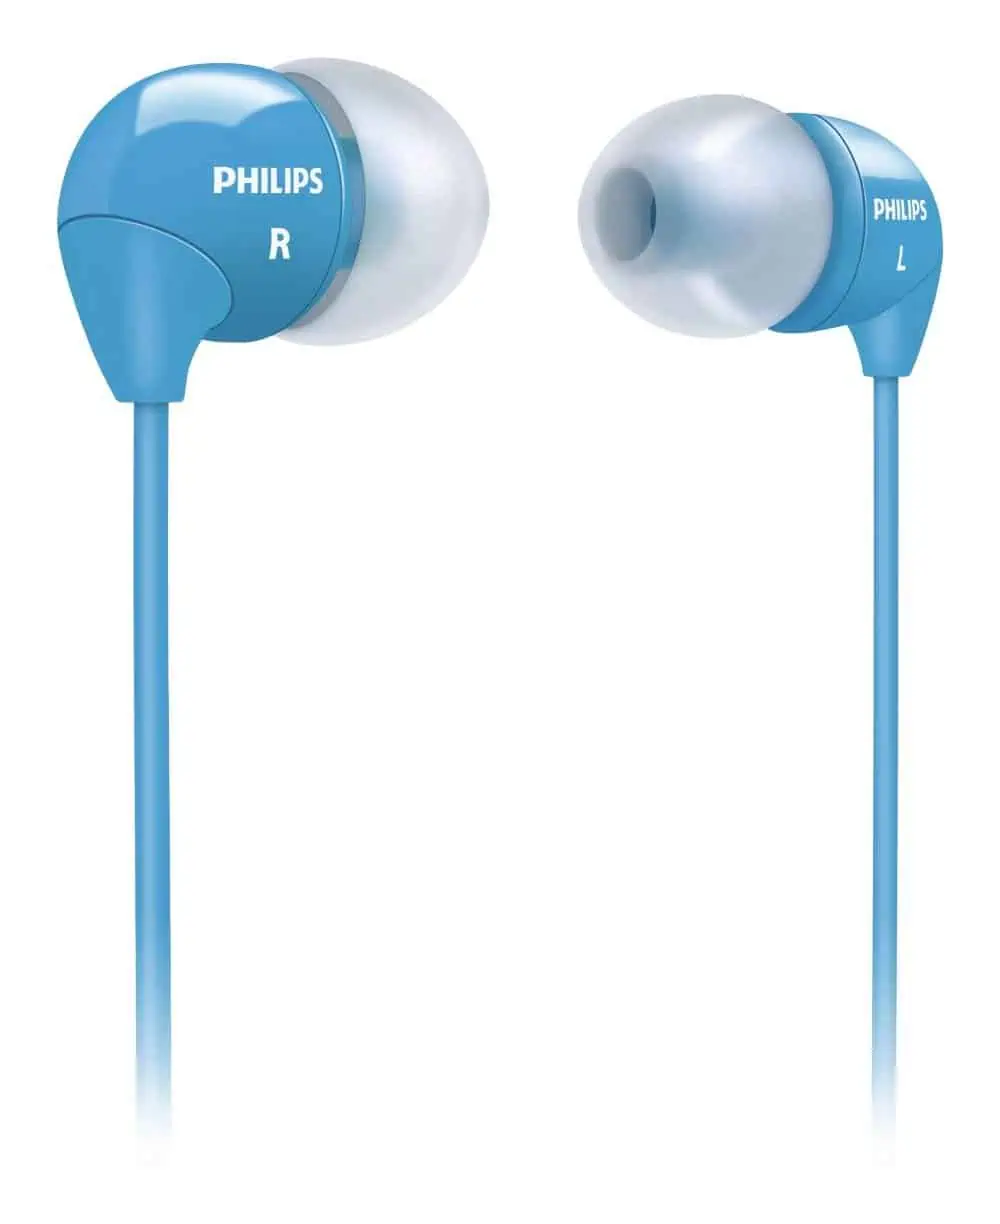 philips audio tae1126 review